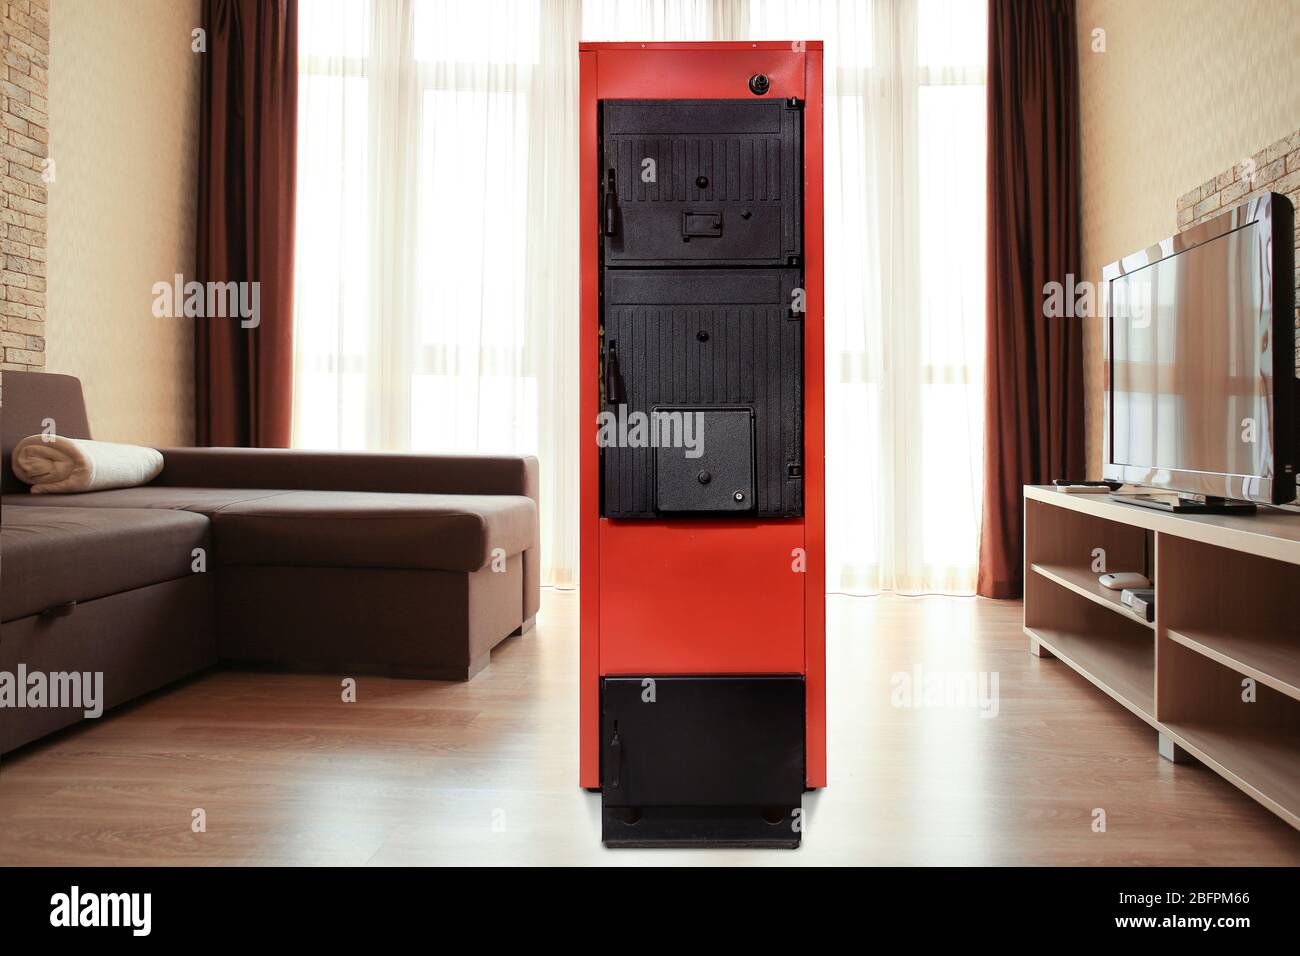 Energy savings concept. Solid fuel boiler in living room Stock Photo